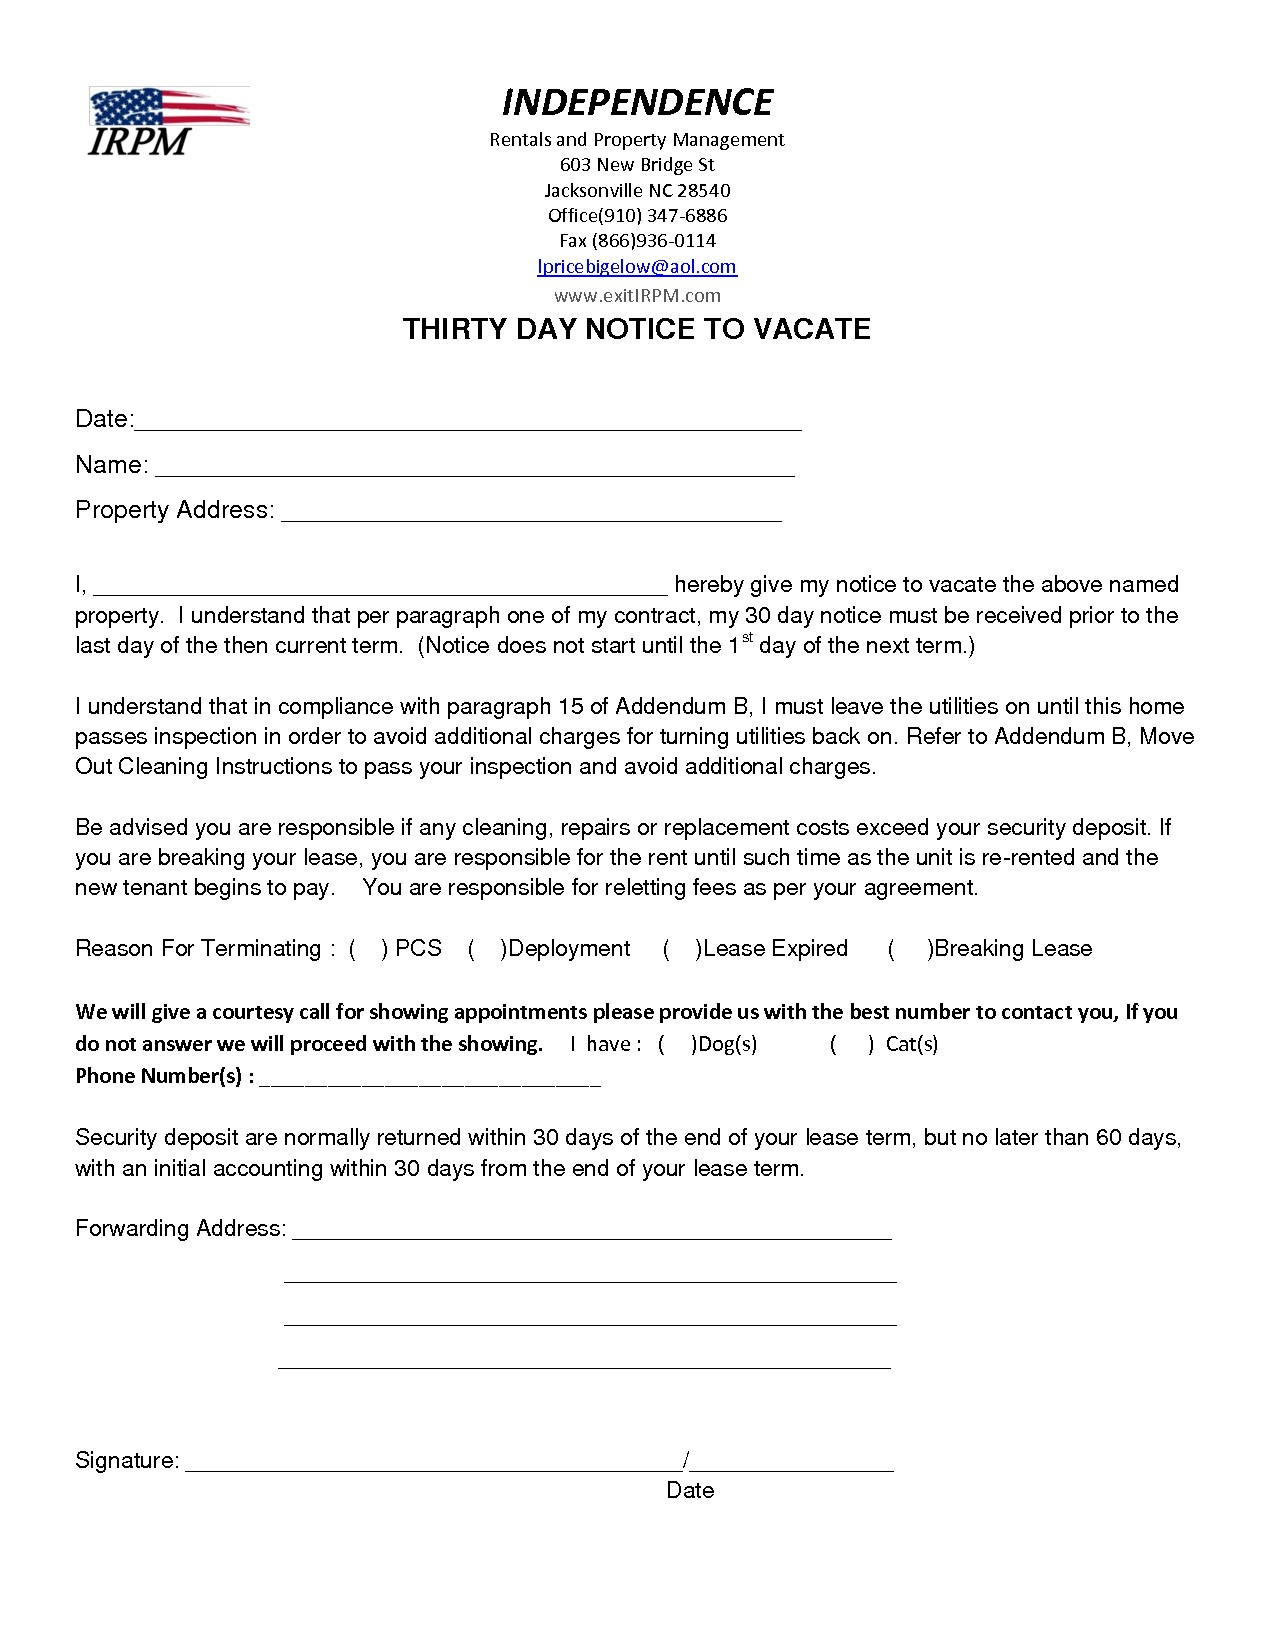 Notice to Vacate Letter to Tenant Template - Template Letter to Leave Property Fresh Collection solutions Best